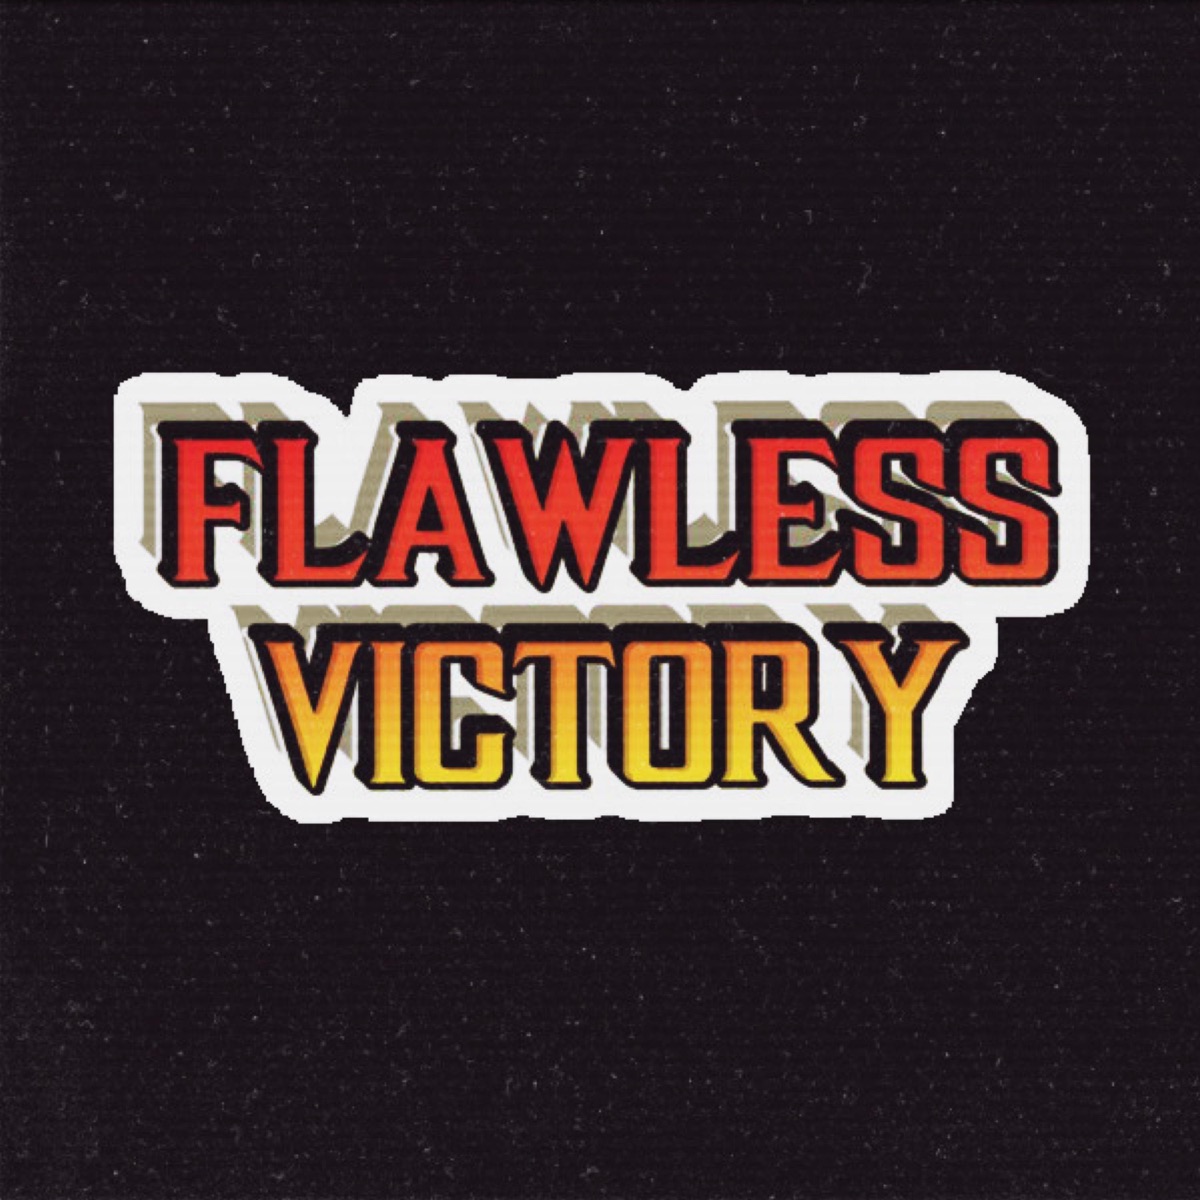 Flawless Victory: albums, songs, playlists